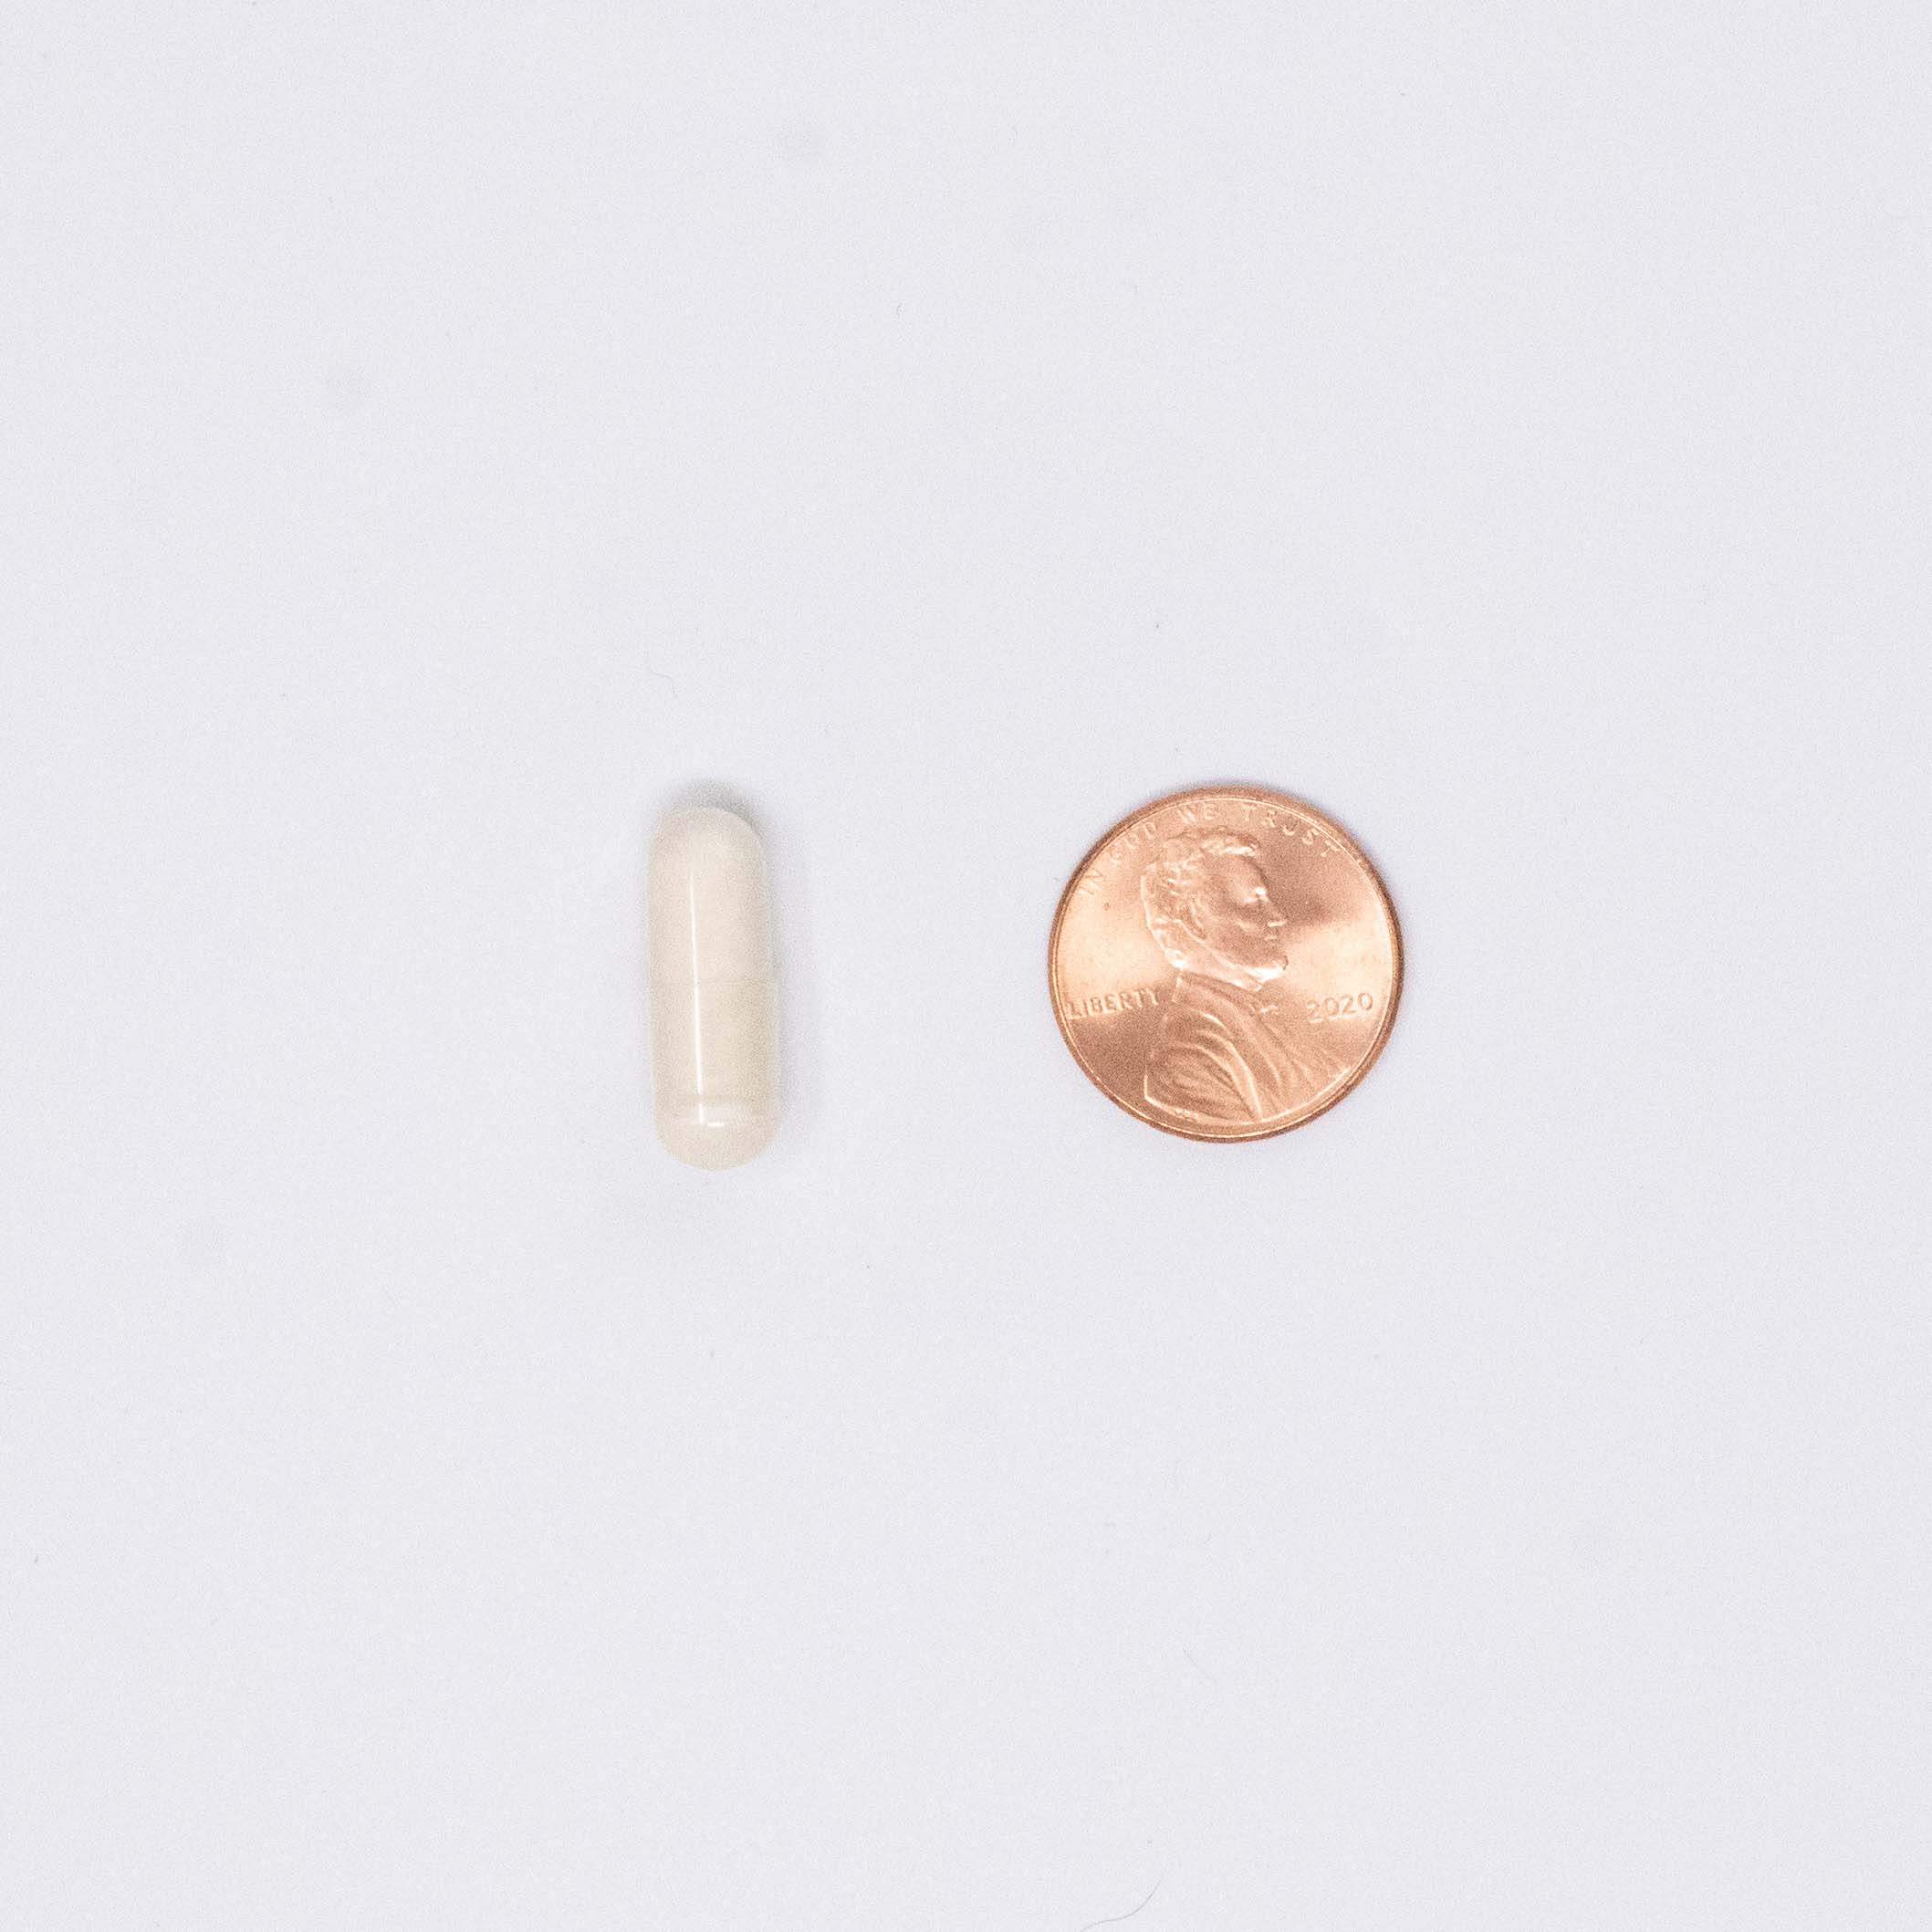 Vitamin D pill compared size to a penny